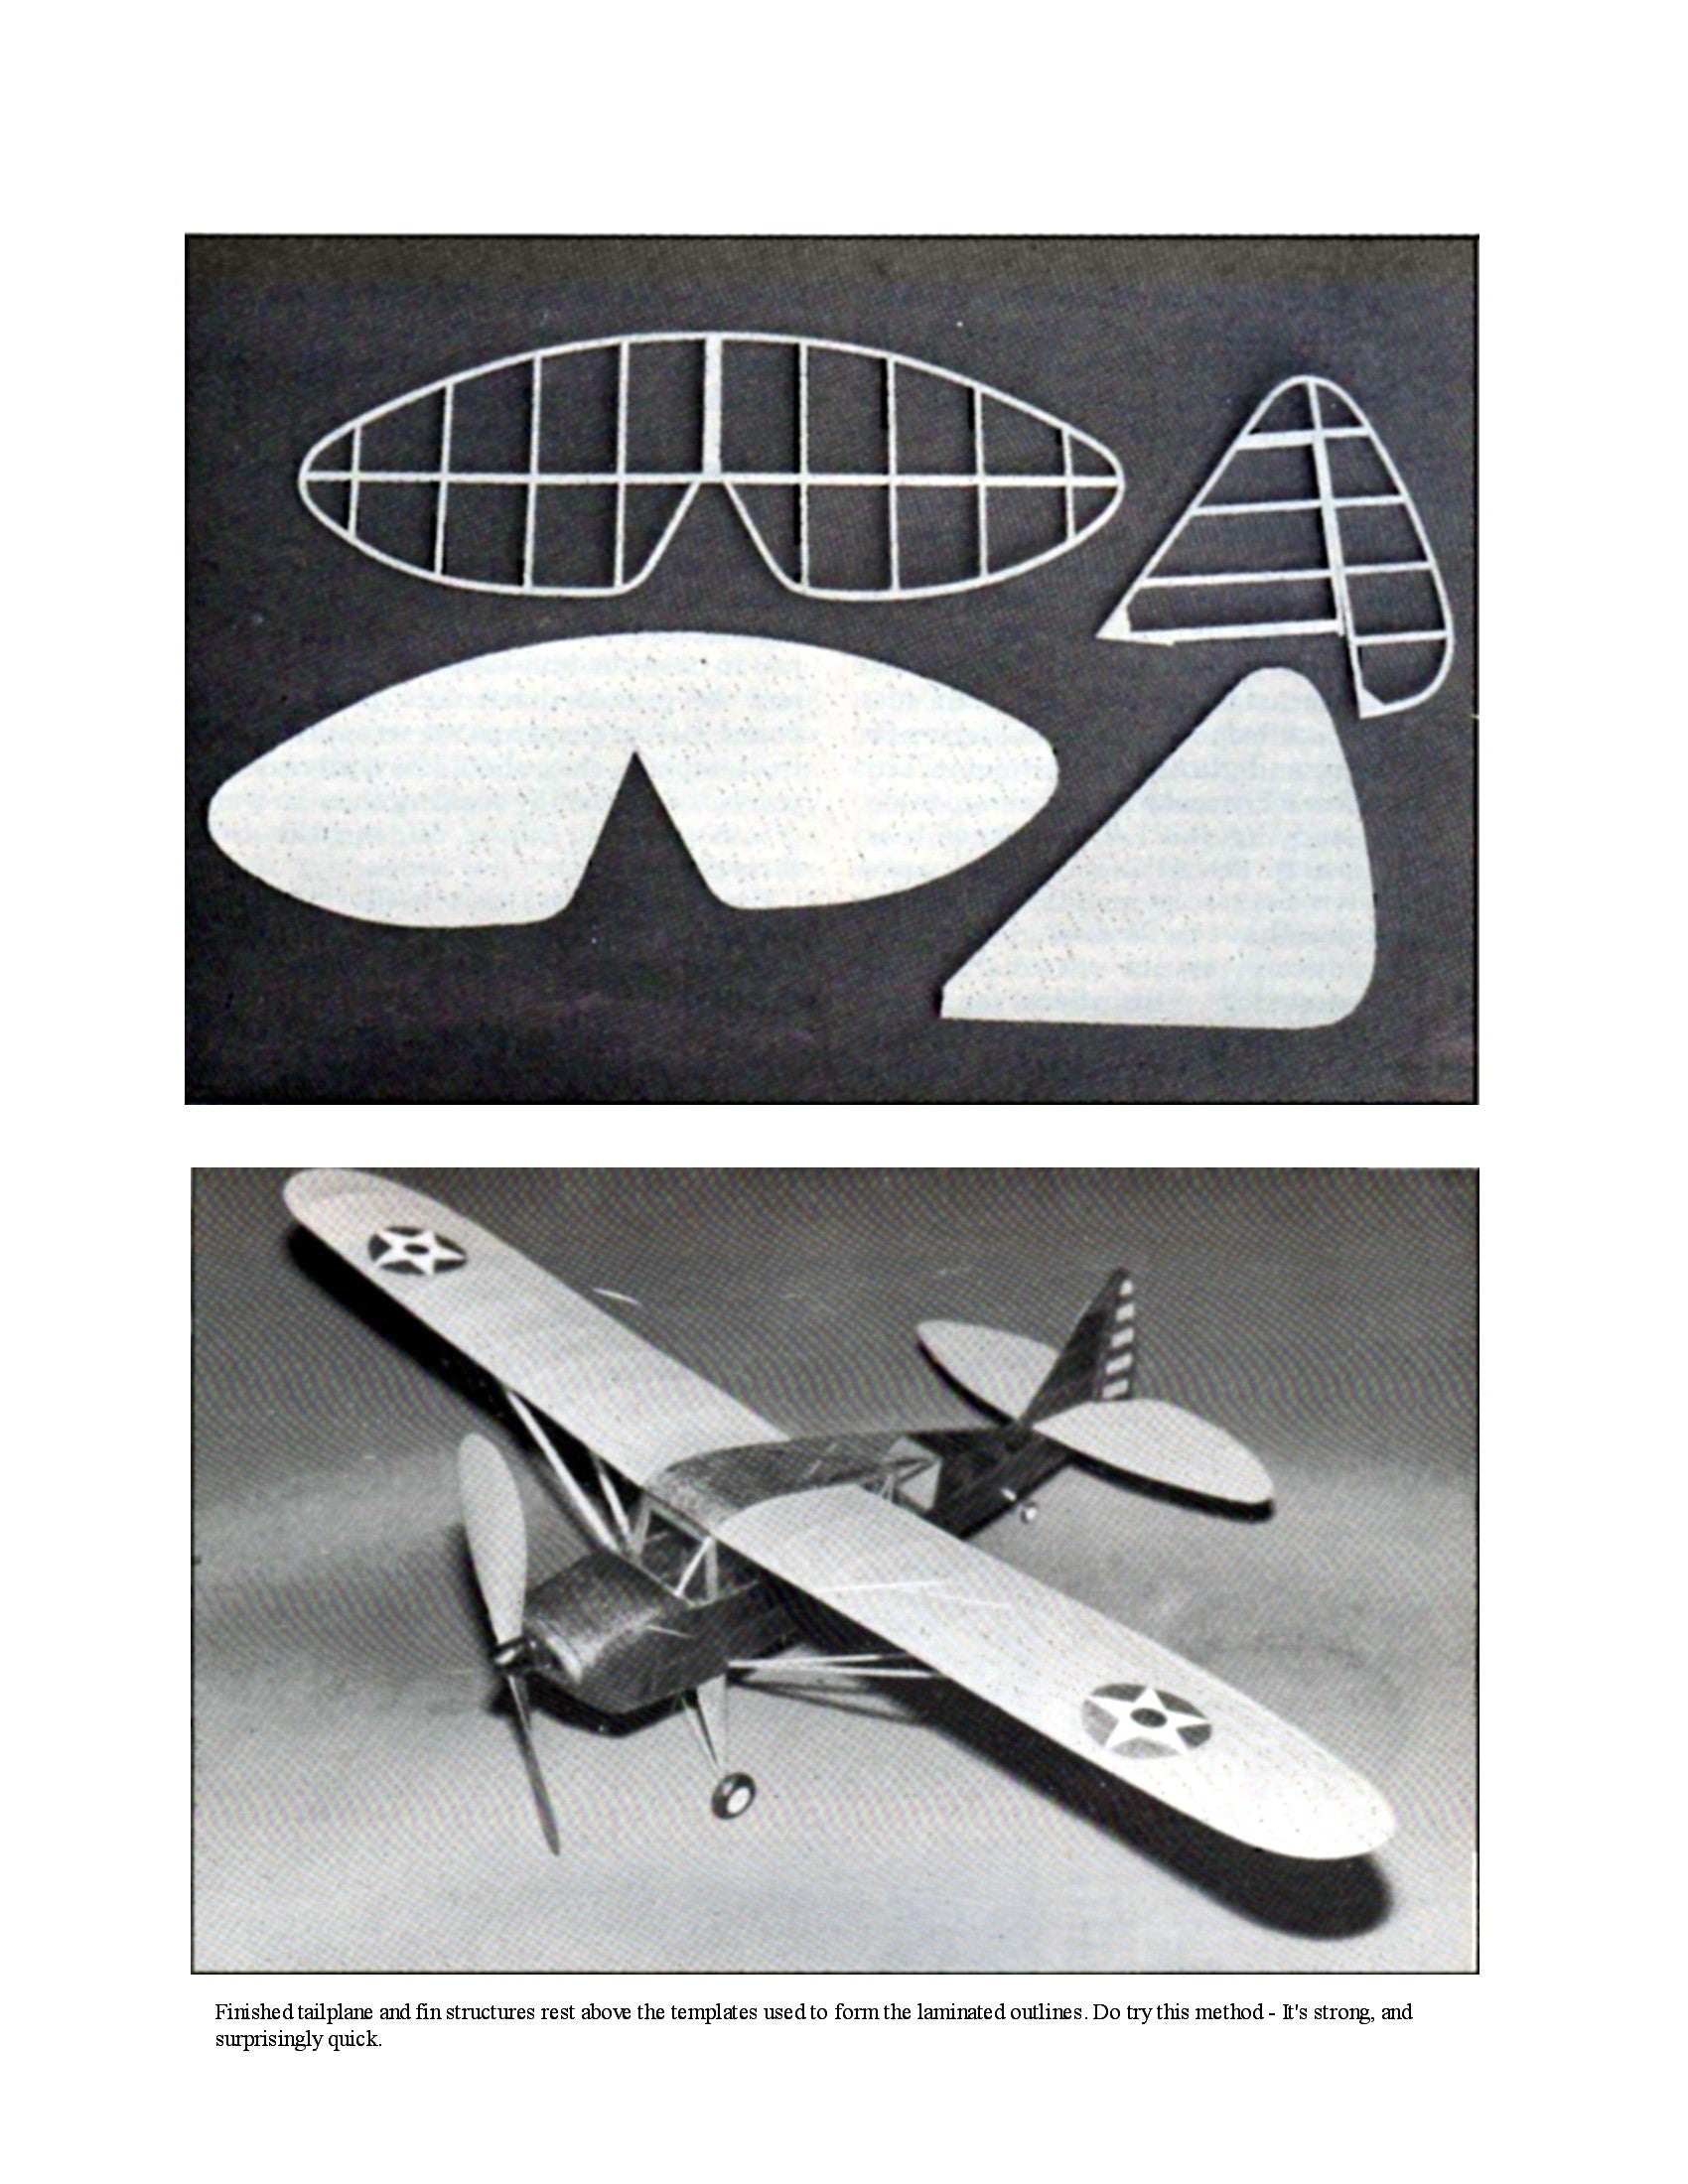 full size printed plans with article interstate l-6 scale 1:16 ( ¾” = 1ft)  wingspan 27”  power rubber